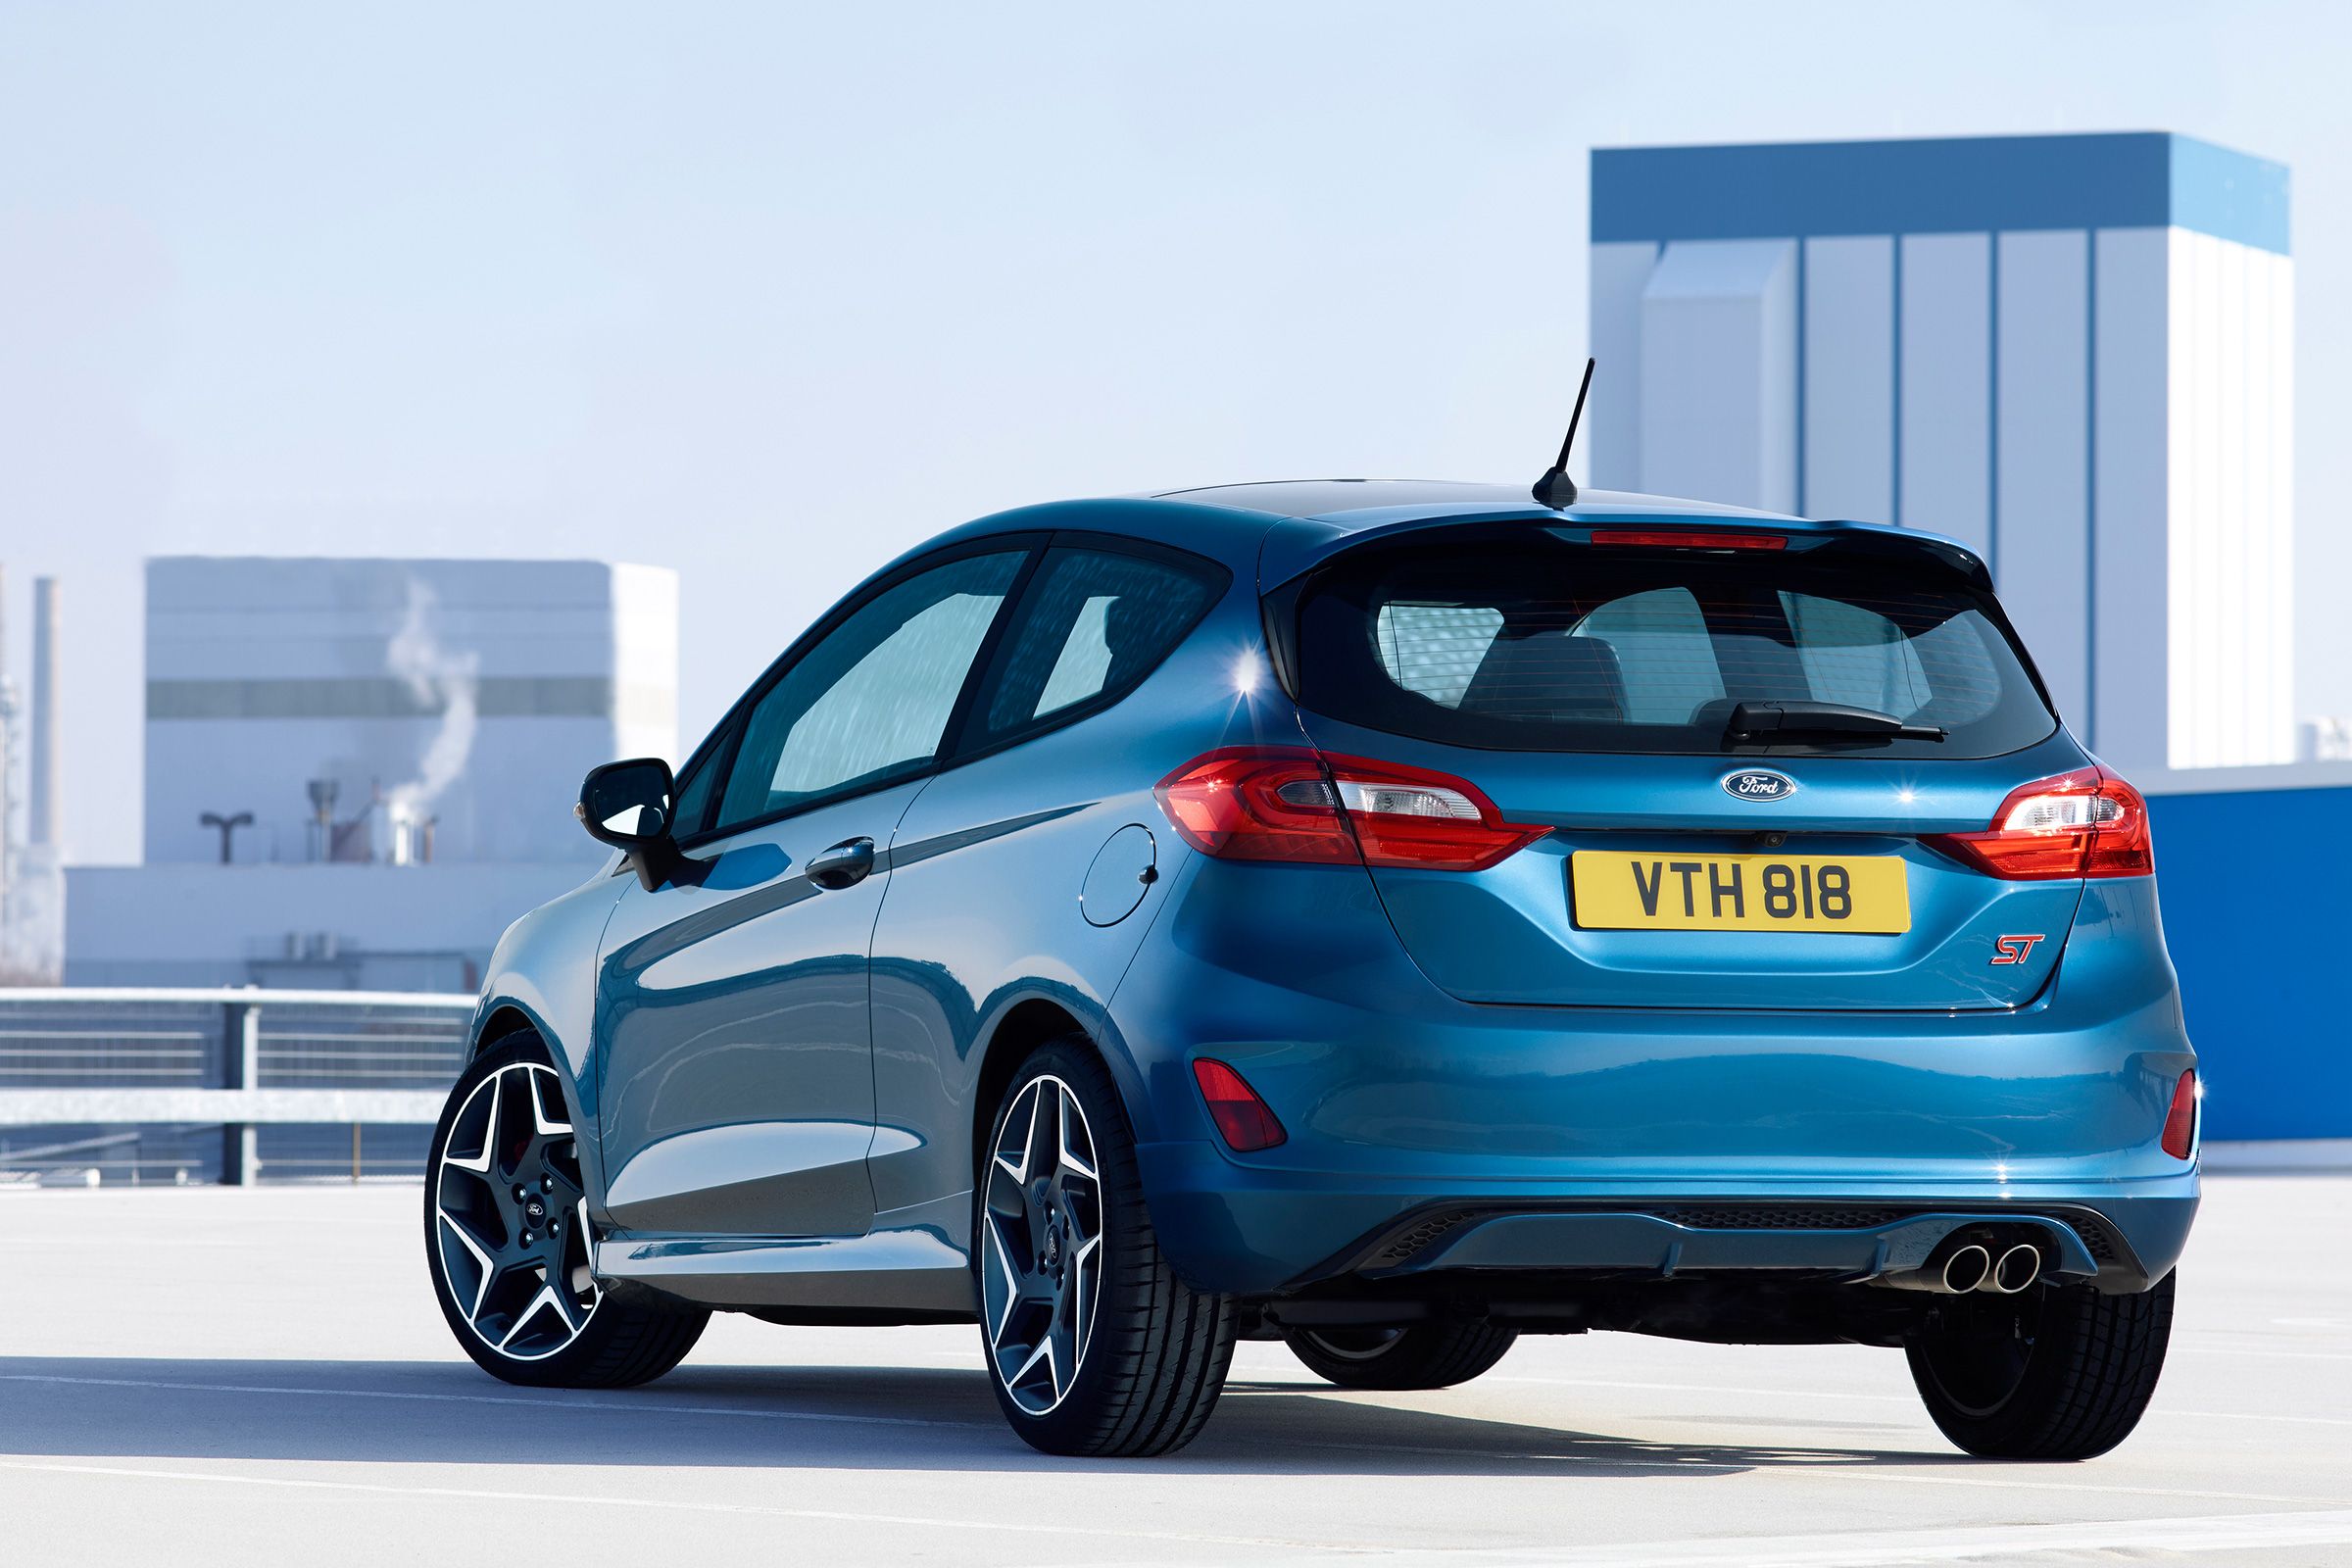 2018 Ford Fiesta St Exterior Rear And Side (View 11 of 51)